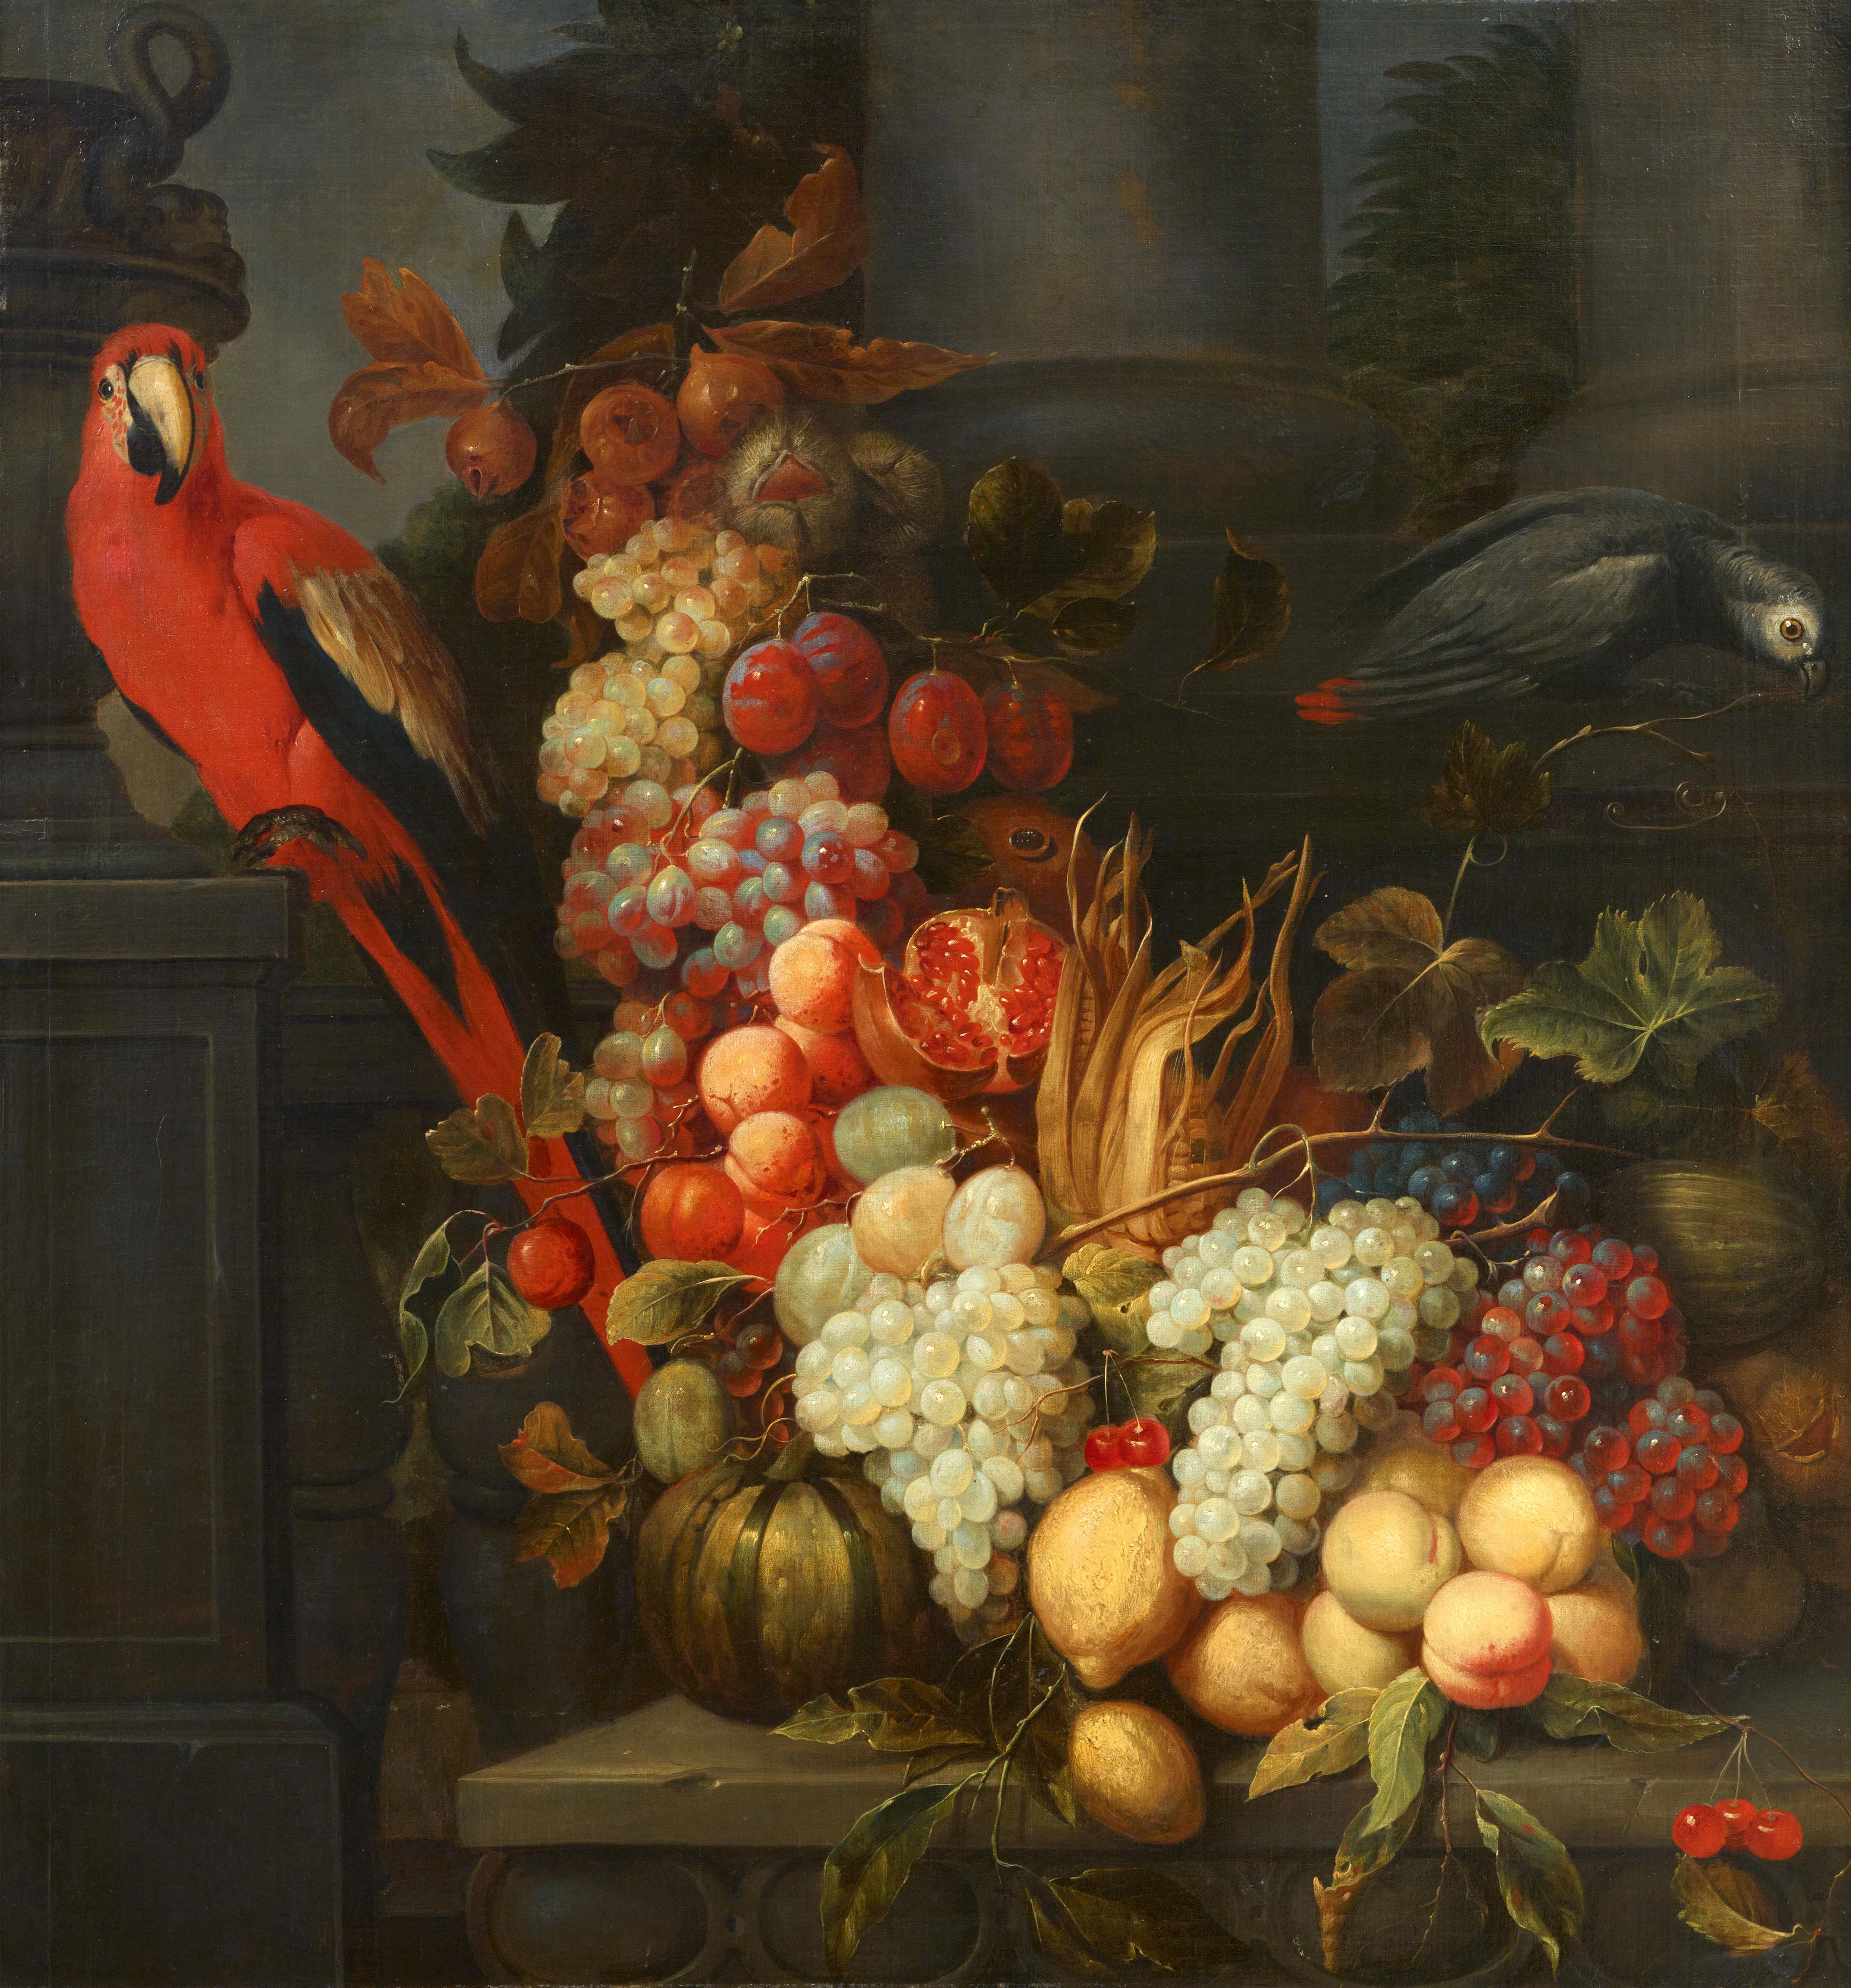 Joris van Son, attributed to - Still Life with a Parrot and Fruit - image-1